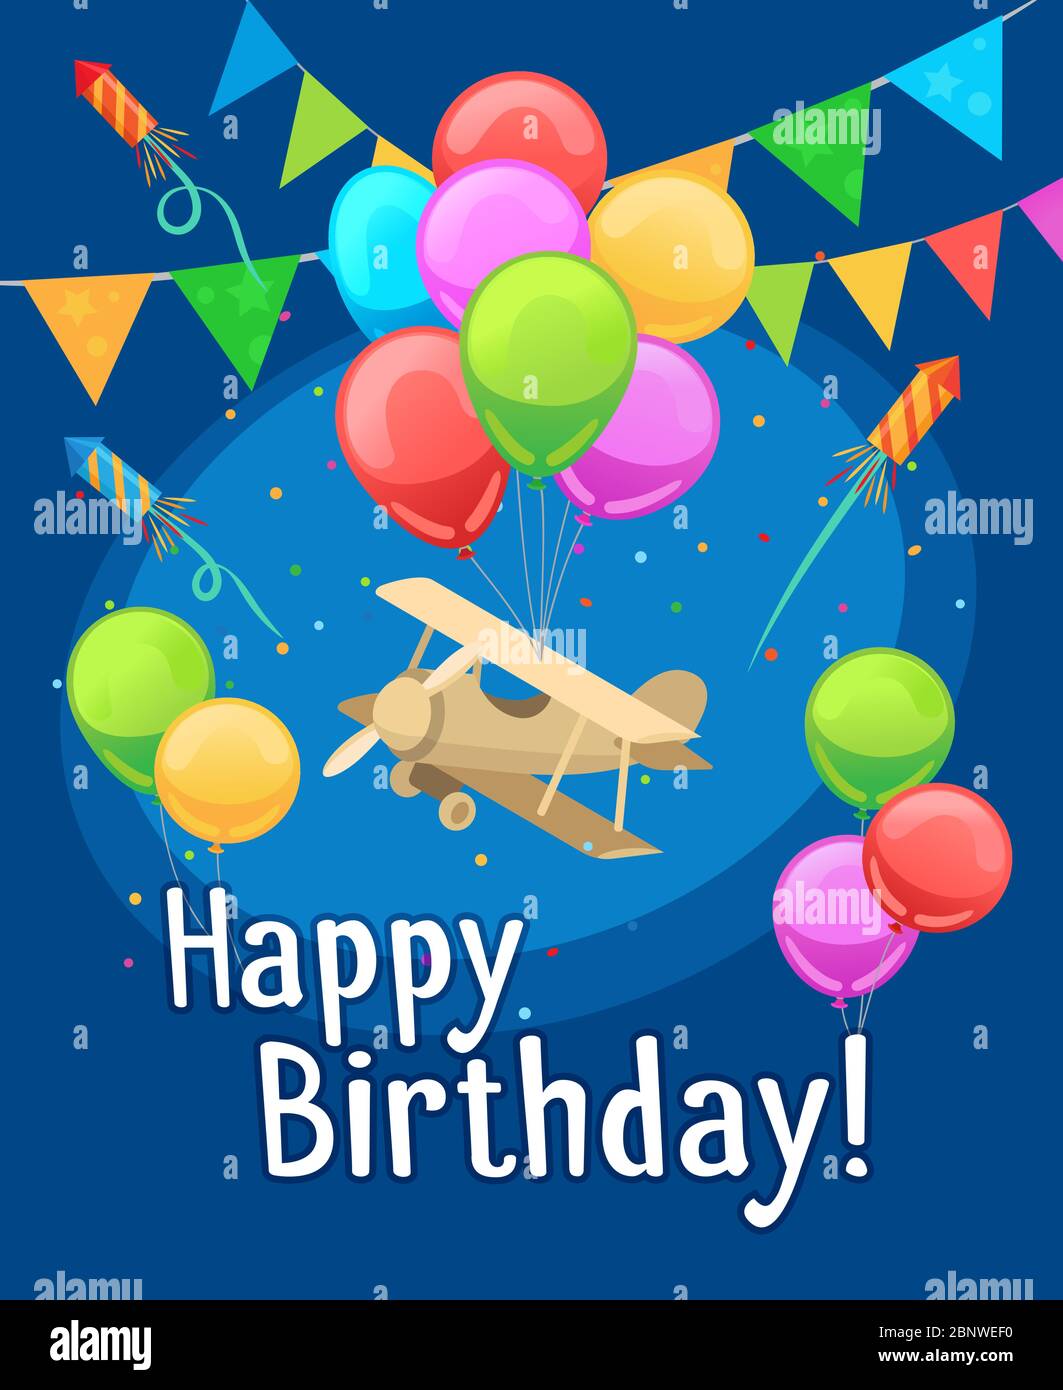 Kids party card template. Children happy birthday card with ...